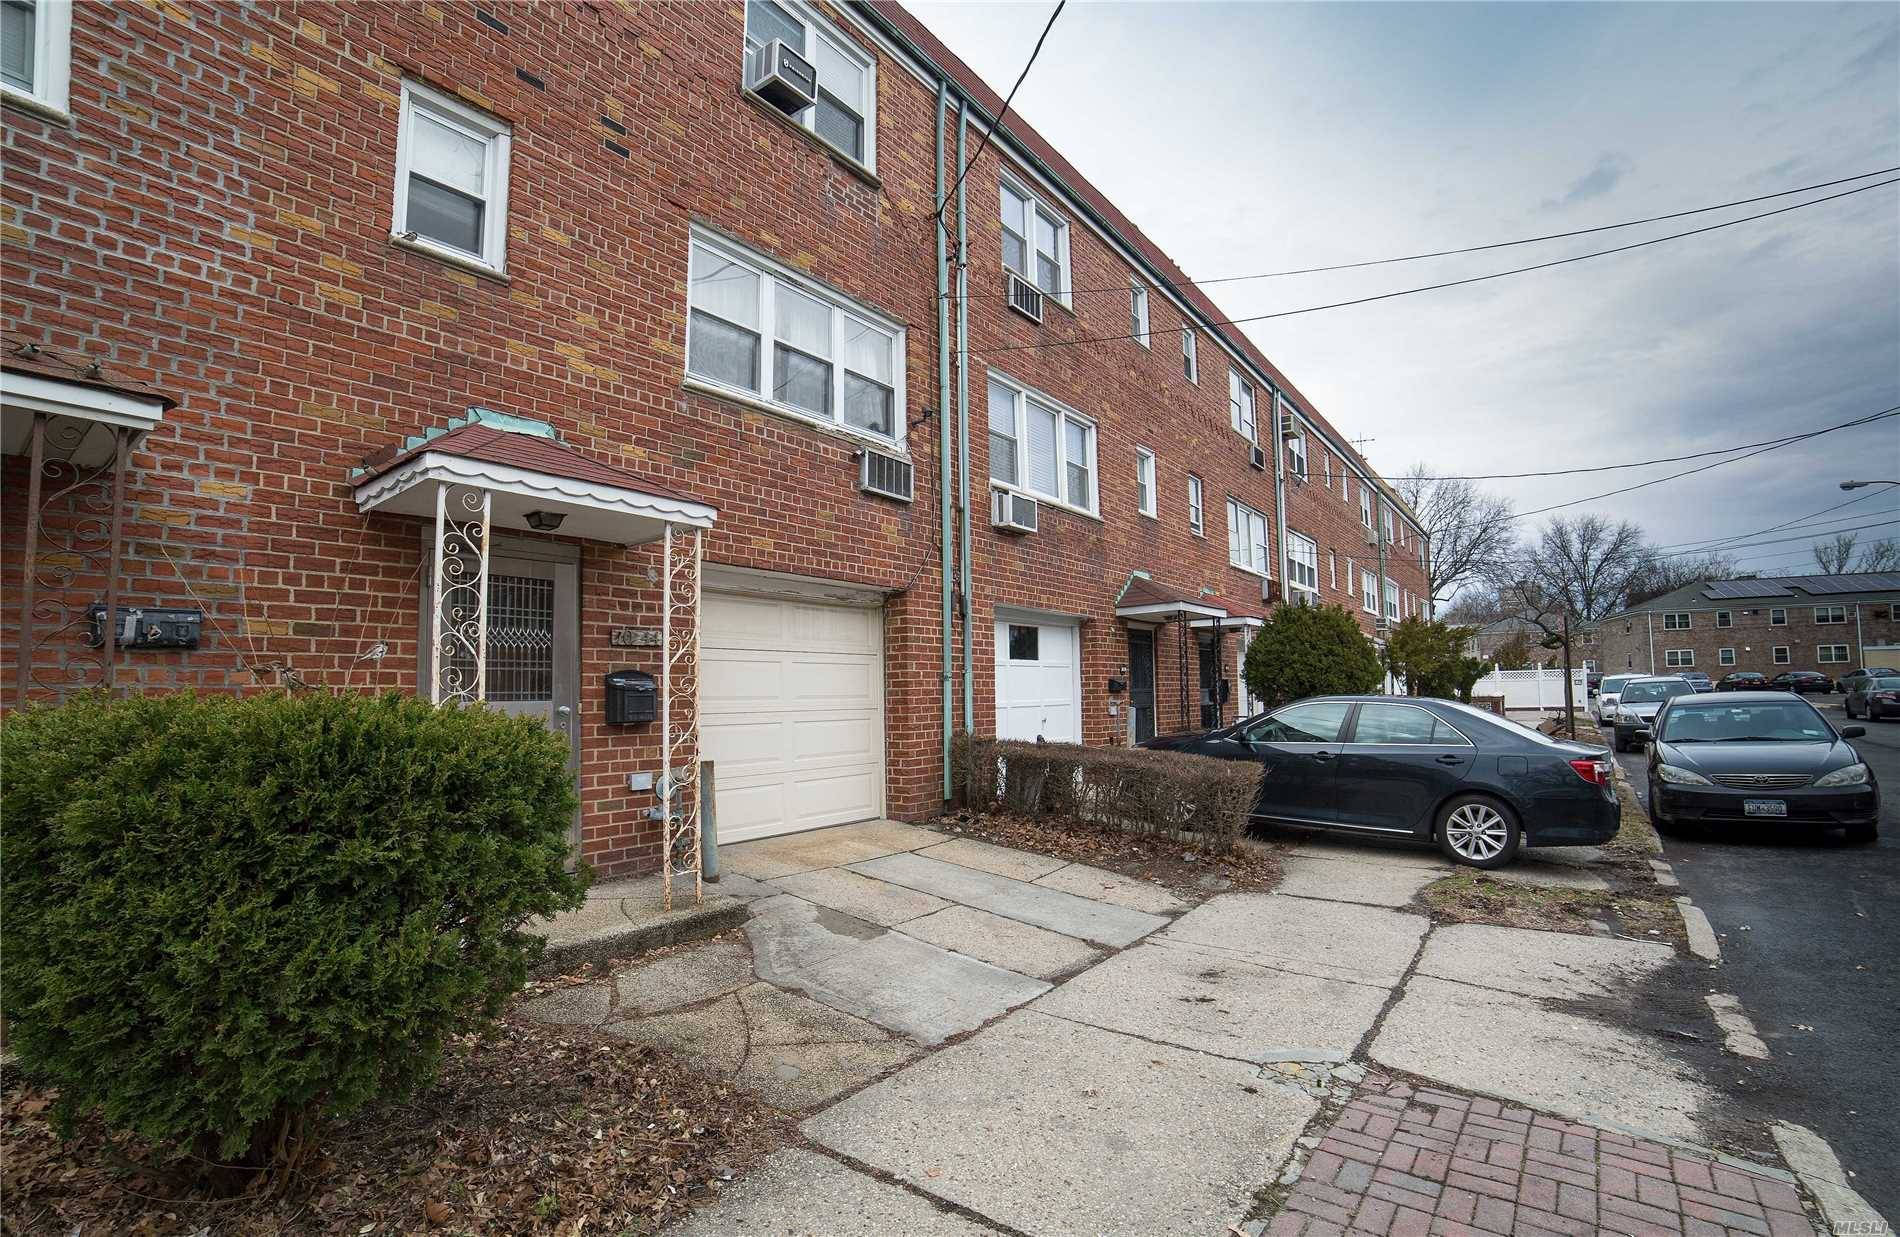 Well-Kept, Spacious Brick Home On A 20' Wide Lot In The Heart Of Kew Garden Hills.